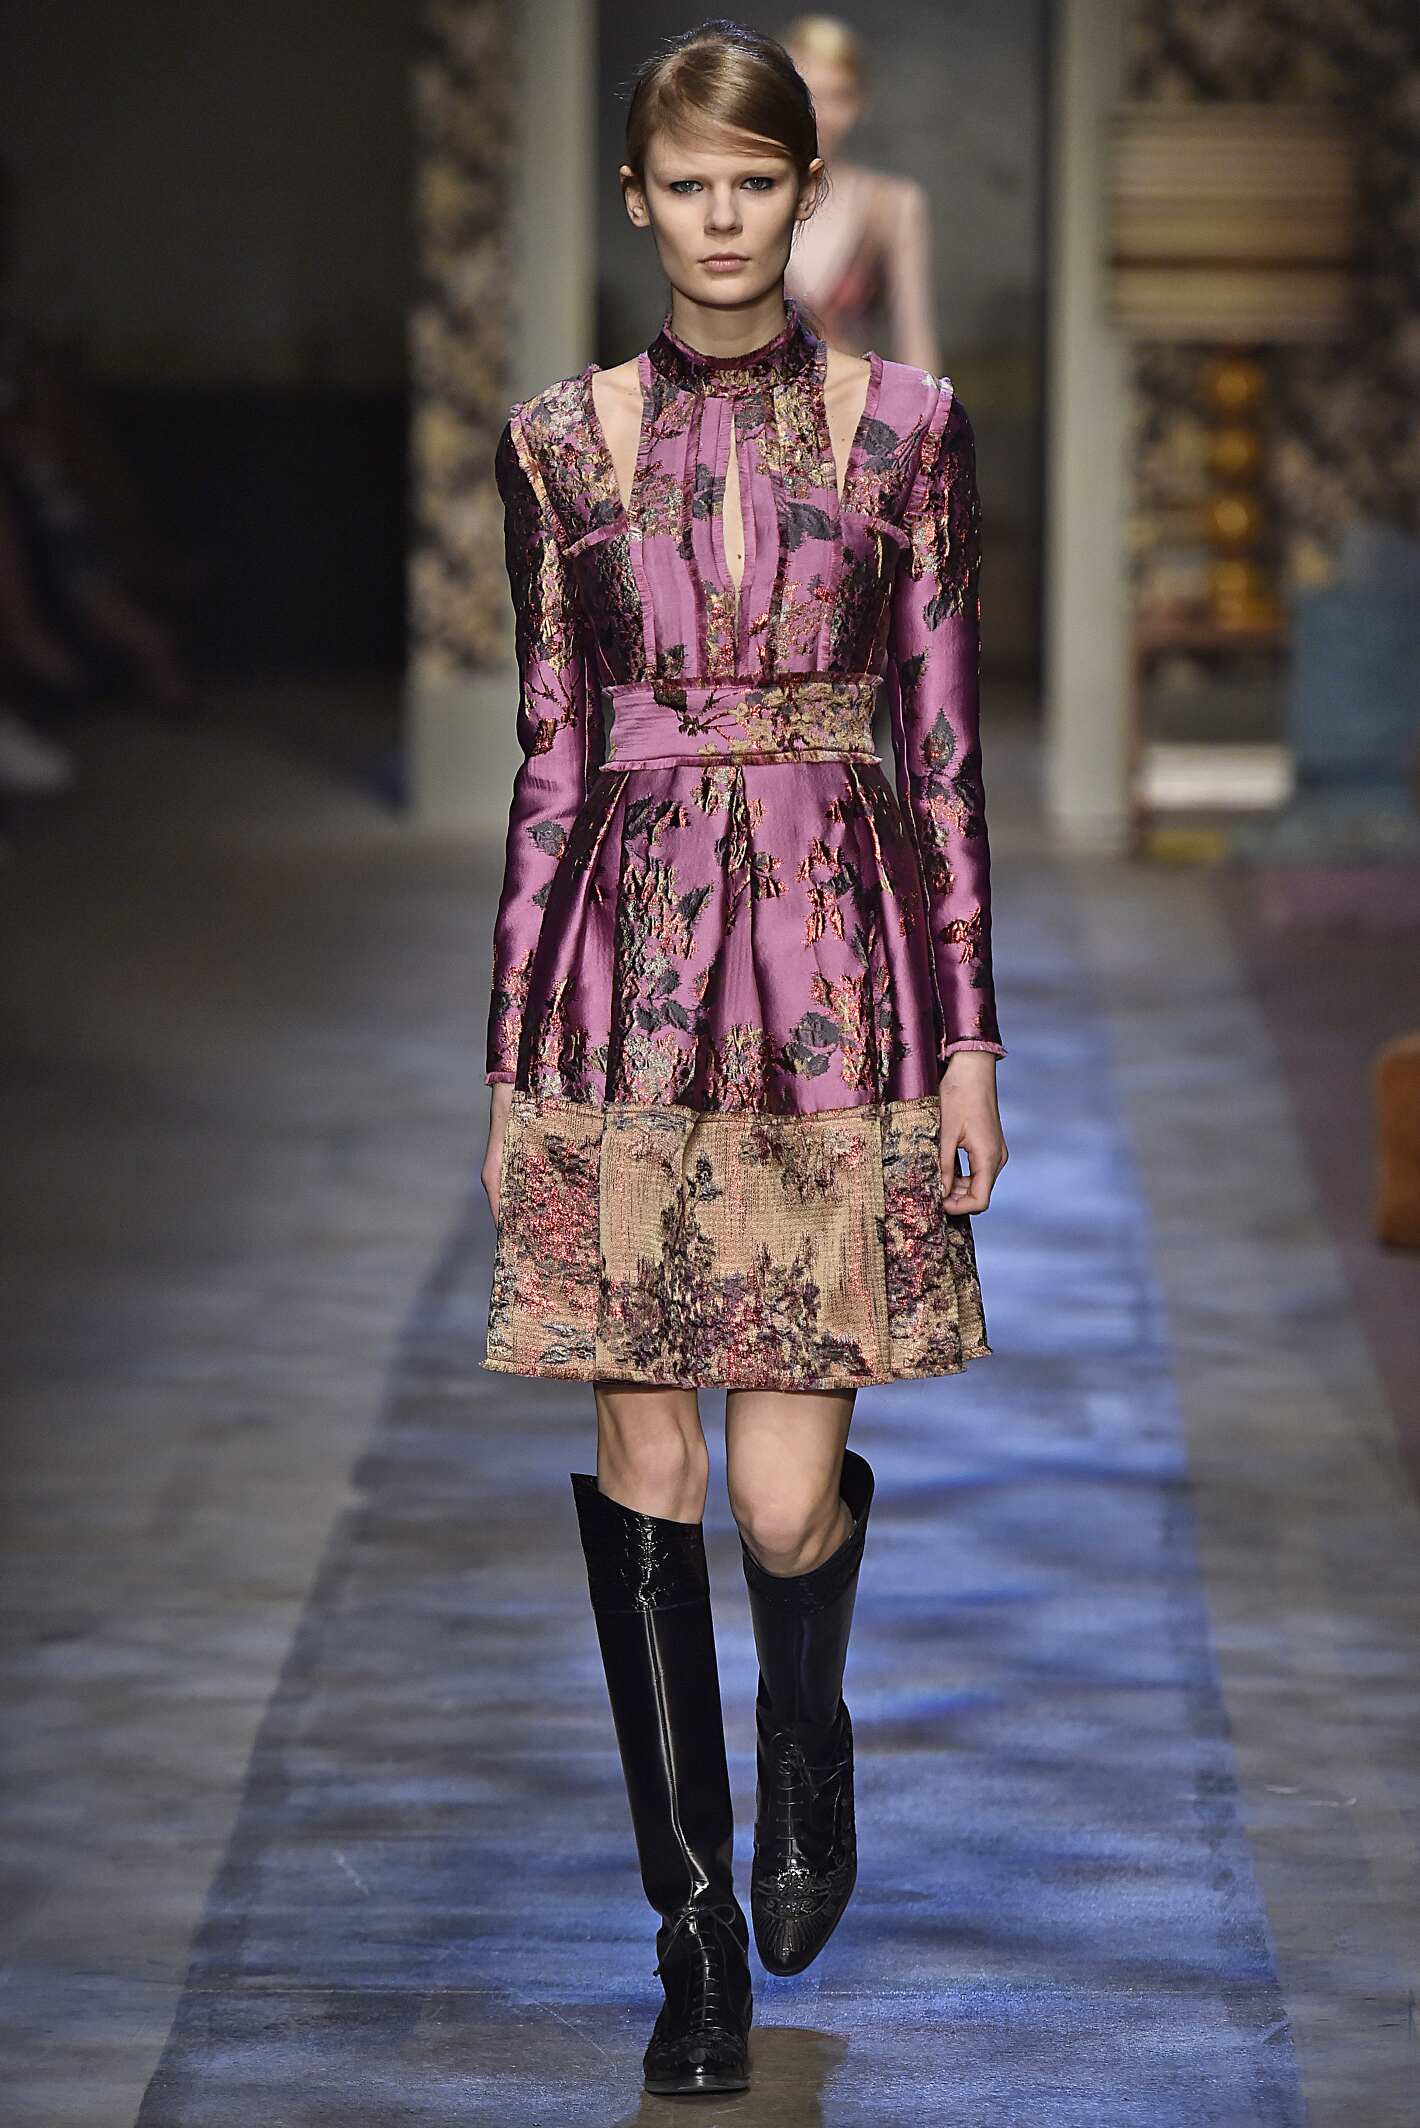 Fall Fashion Woman Erdem Collection